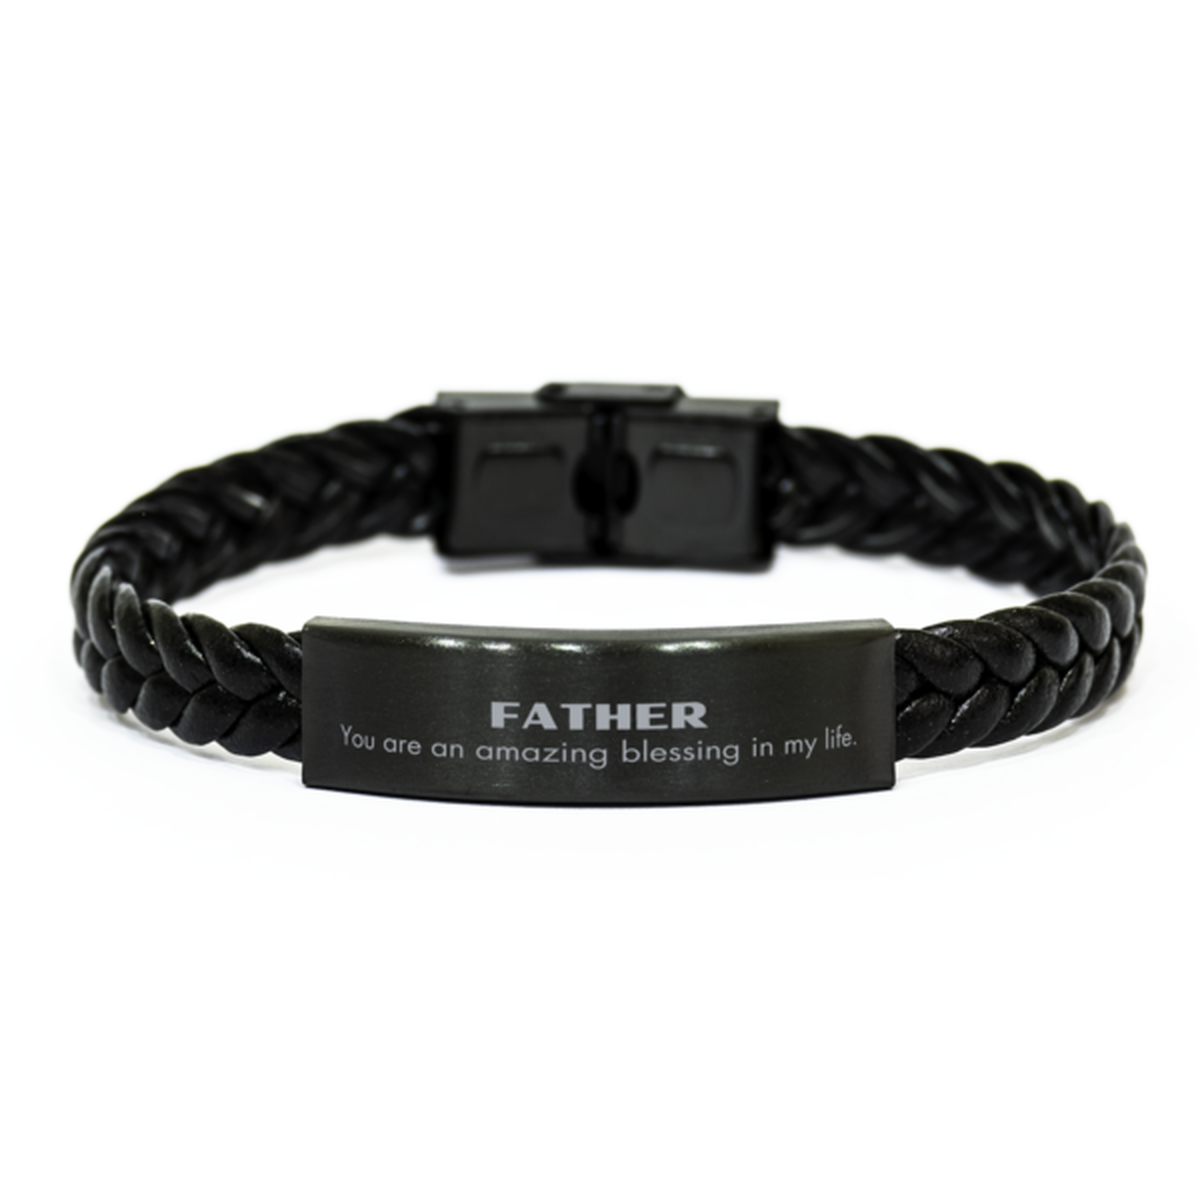 Father Braided Leather Bracelet, You are an amazing blessing in my life, Thank You Gifts For Father, Inspirational Birthday Christmas Unique Gifts For Father